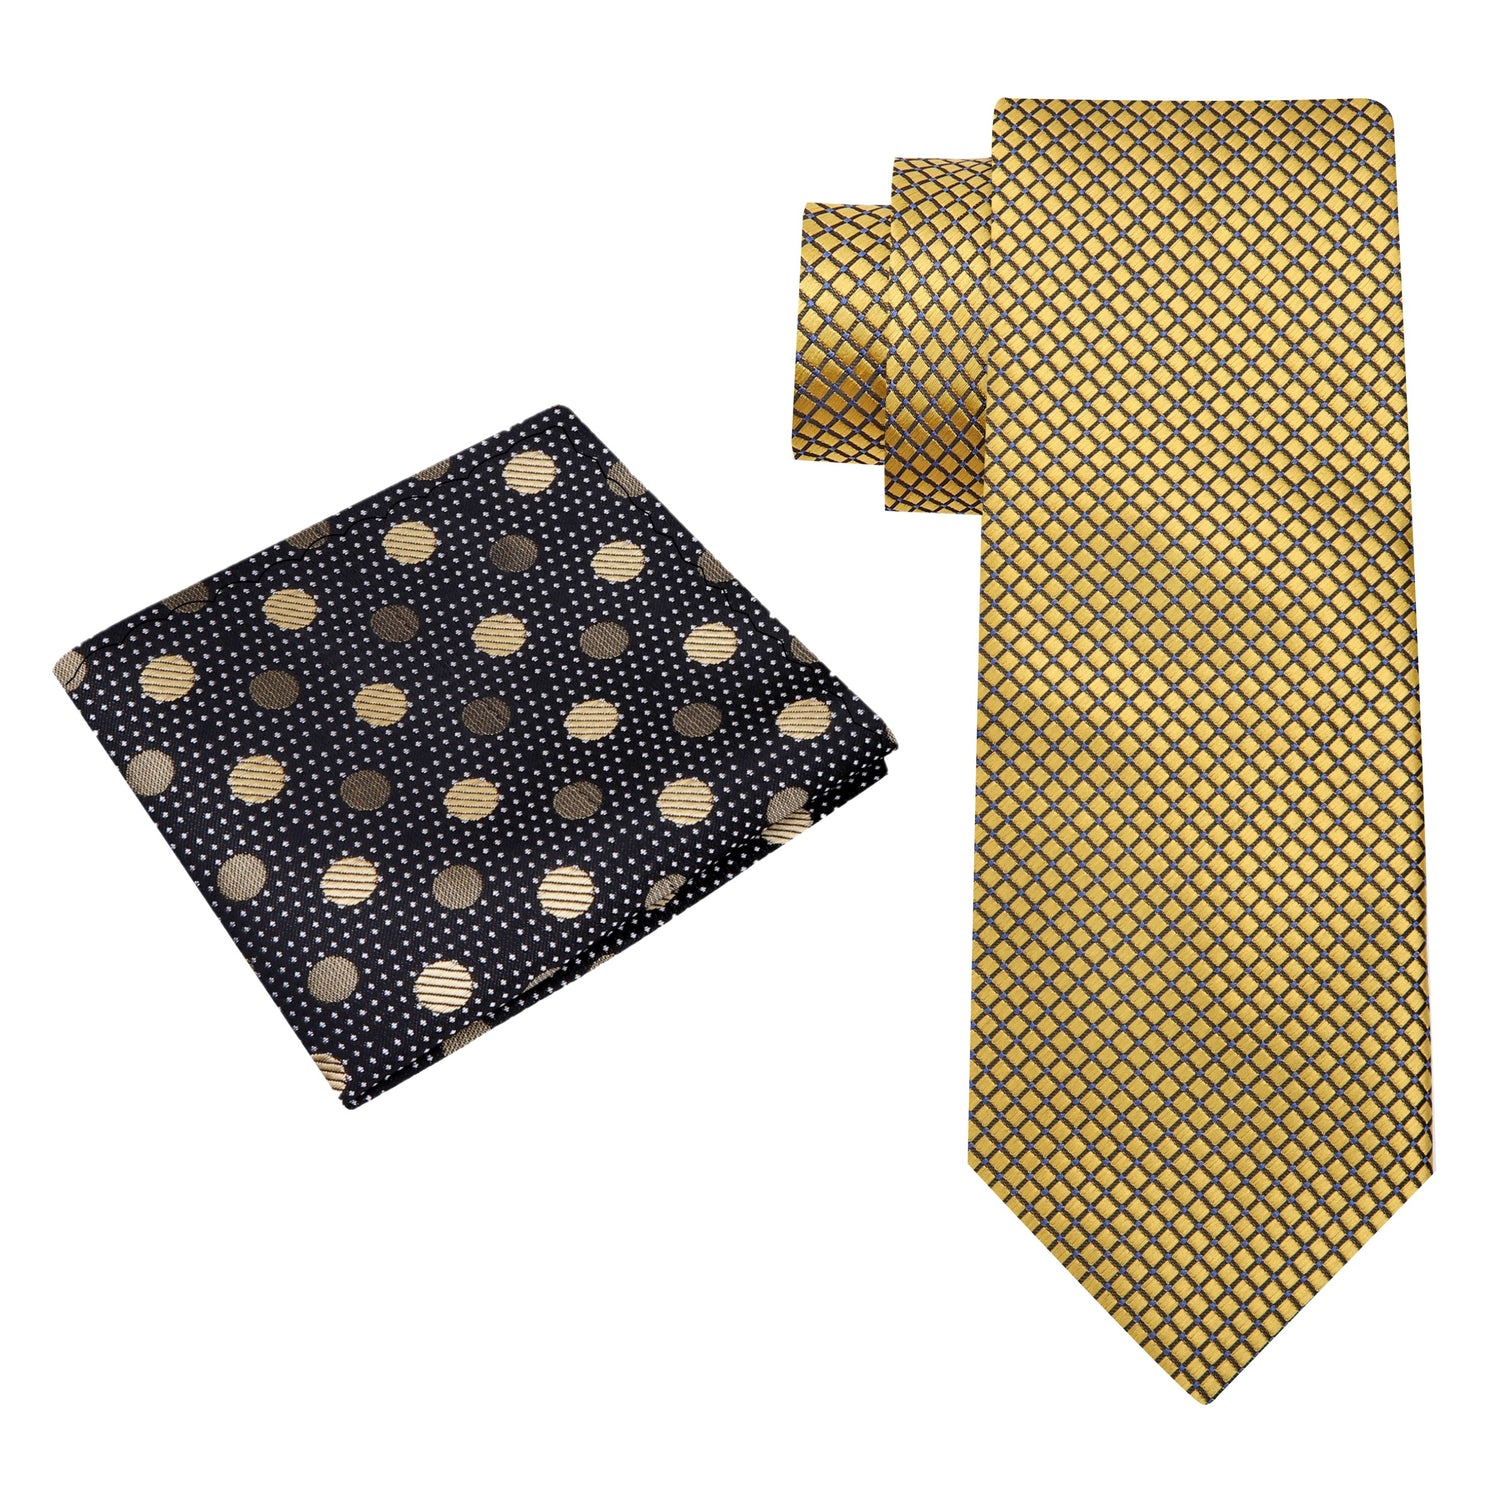 Alt View; Gold Geometric Tie and Accenting Square